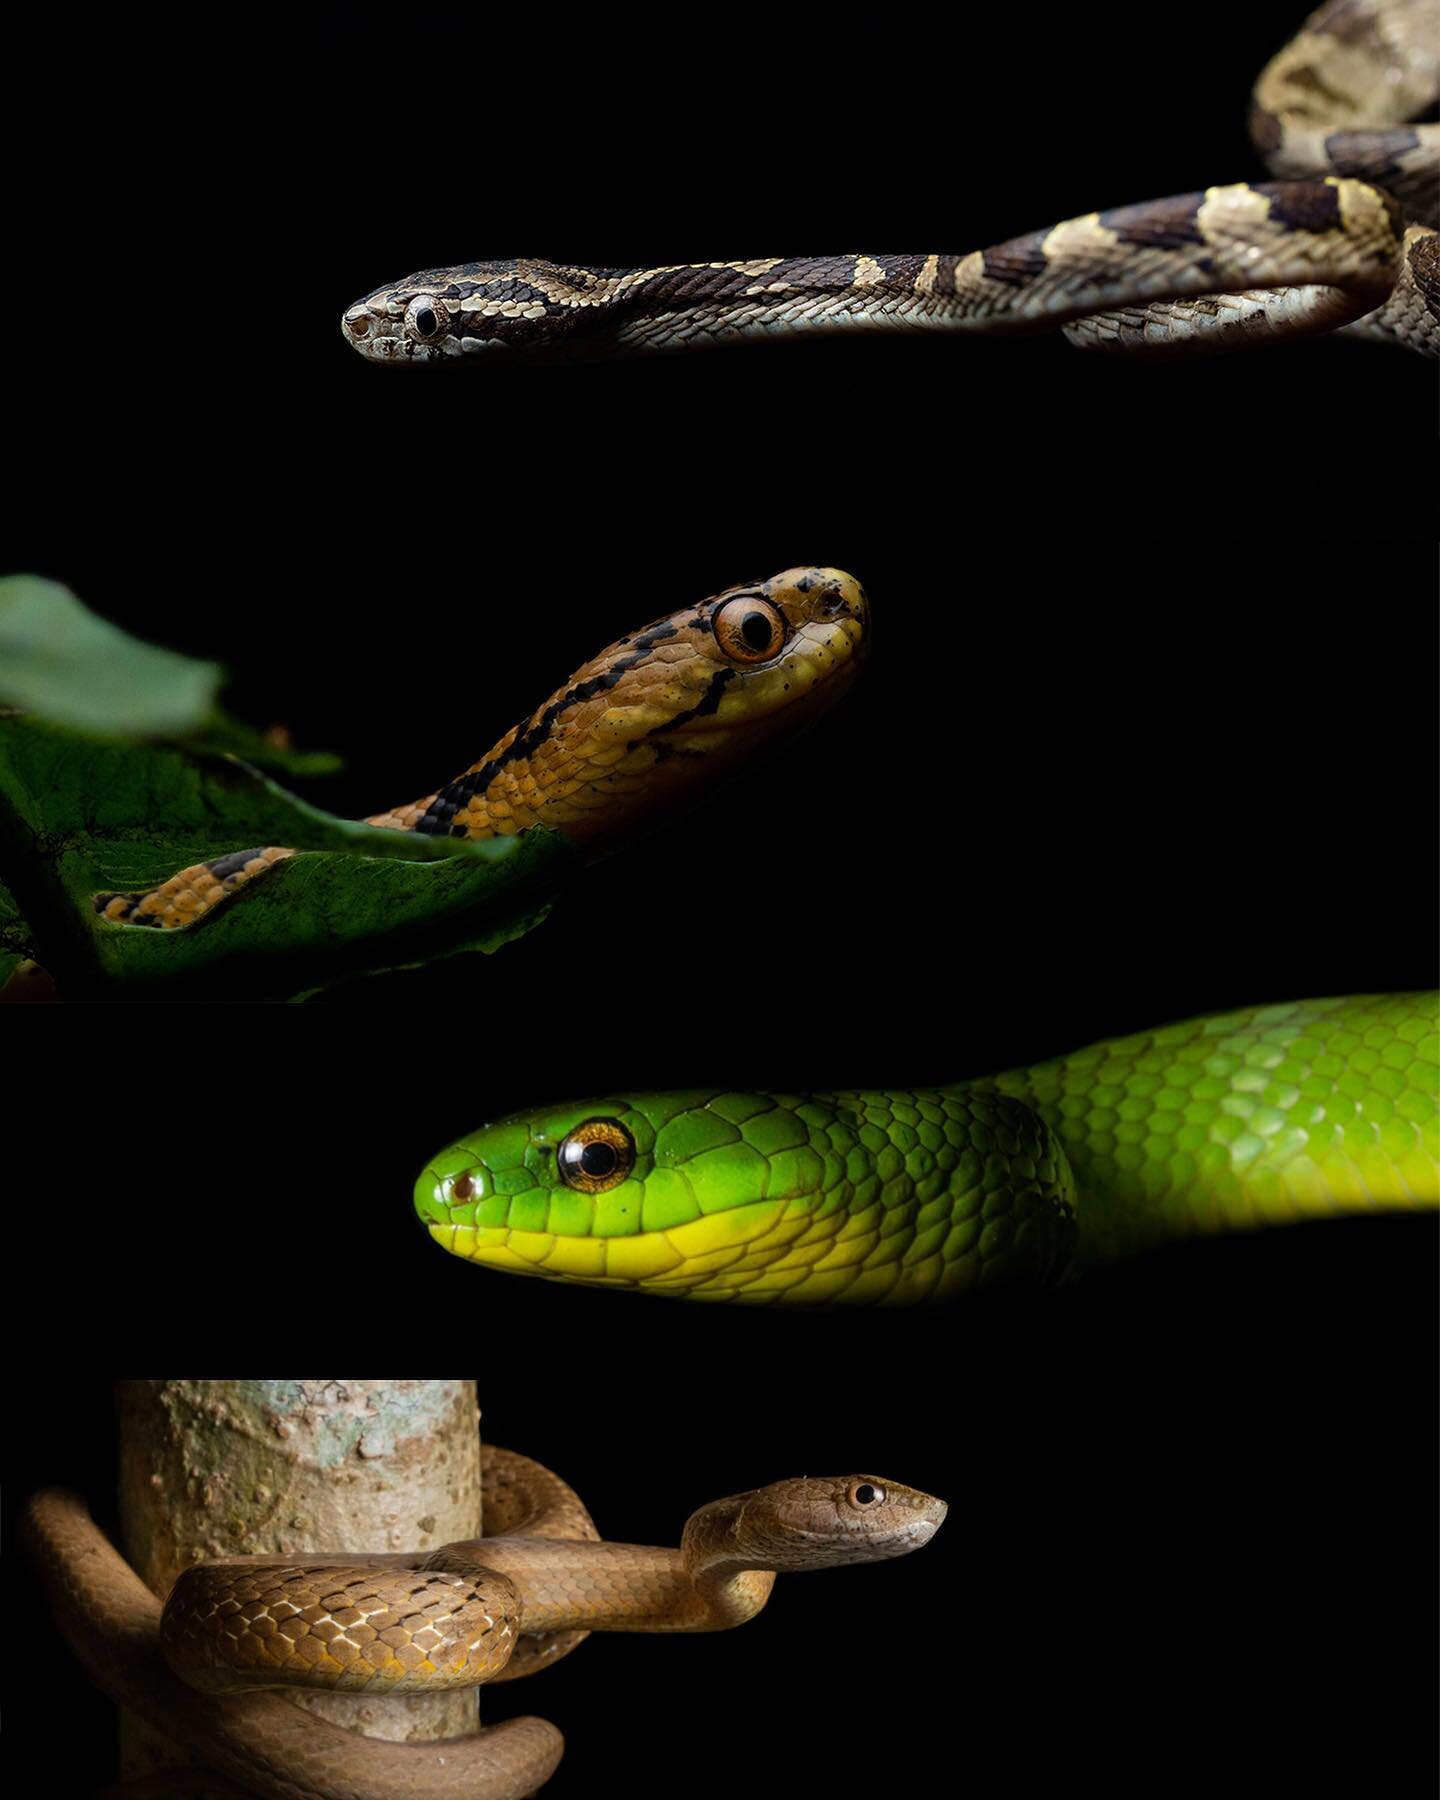 Some common snakes of Taiwan. Man I can&rsquo;t wait to go night hiking again!

1. Square Headed Cat Snake morph (Boiga kraepelini)

This snake is mildly venomous, but a bite is harmless to humans. They are rear fanged and live in the trees.

2. Atay